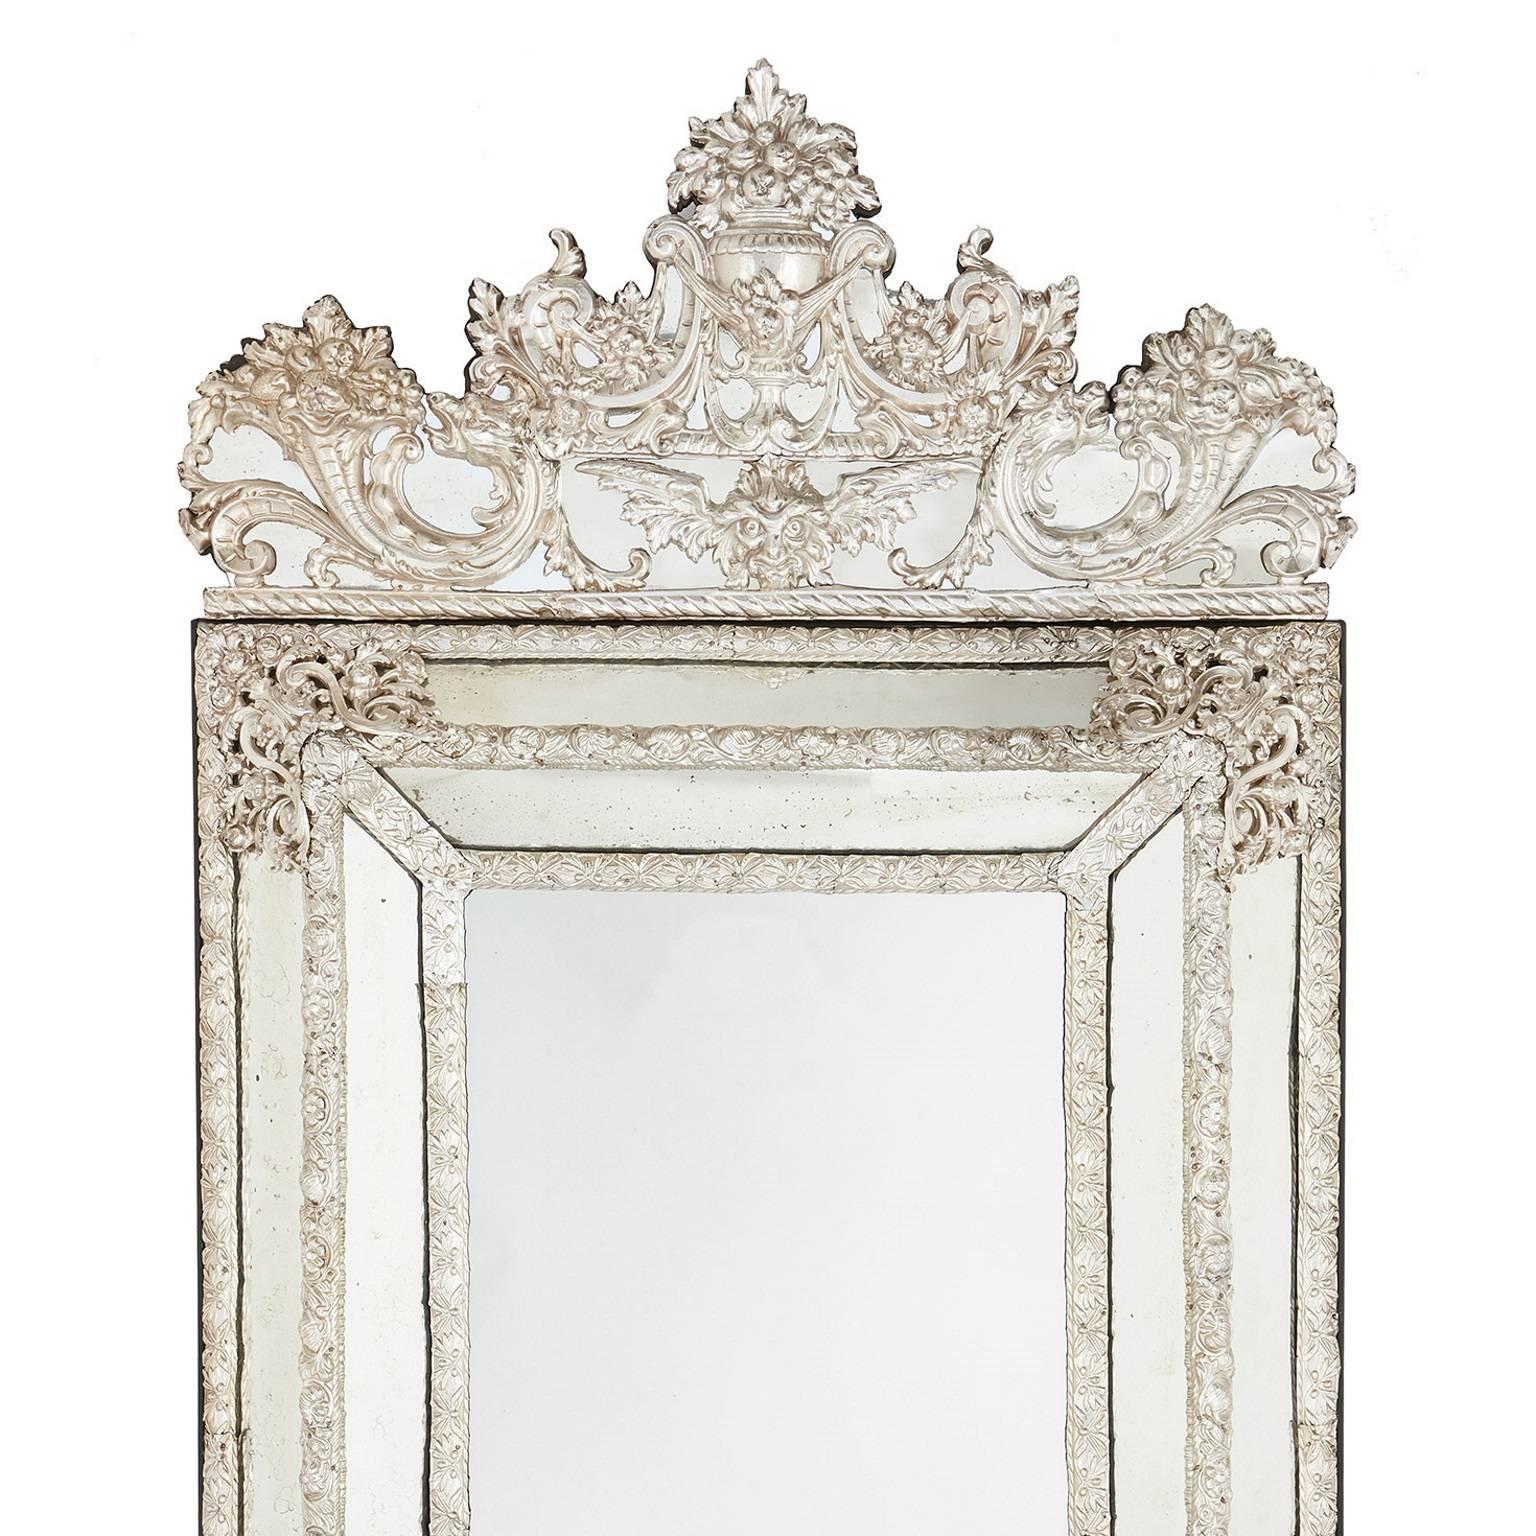 Large rectangular antique silvered French mirror in the Baroque style
French, 19th Century
Height 153cm, width 94cm, depth 11cm

Imitating the Dutch eighteenth century Baroque style, and crafted in France in the nineteenth, this exceptional piece is